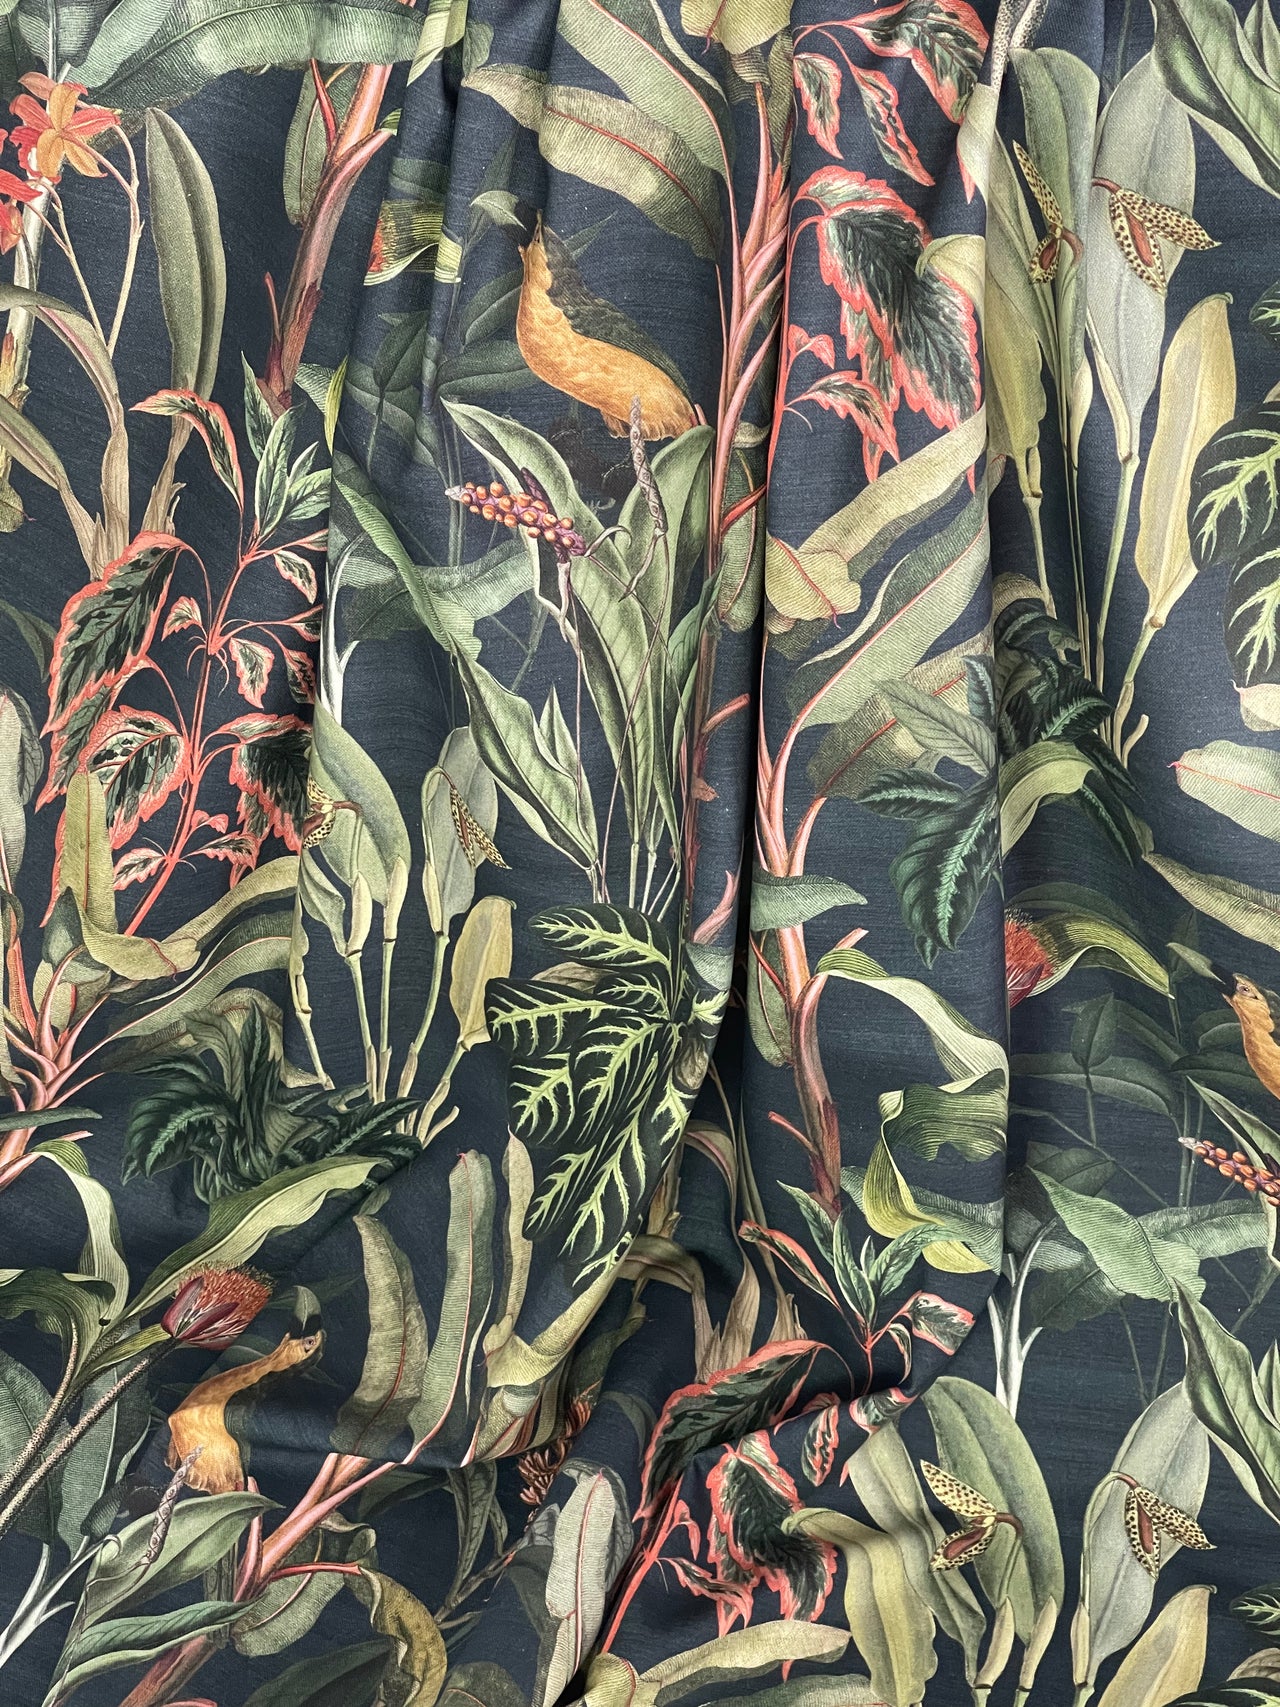 Exquisite Rainforest Cotton Fabric - Bring the Outdoors Inside